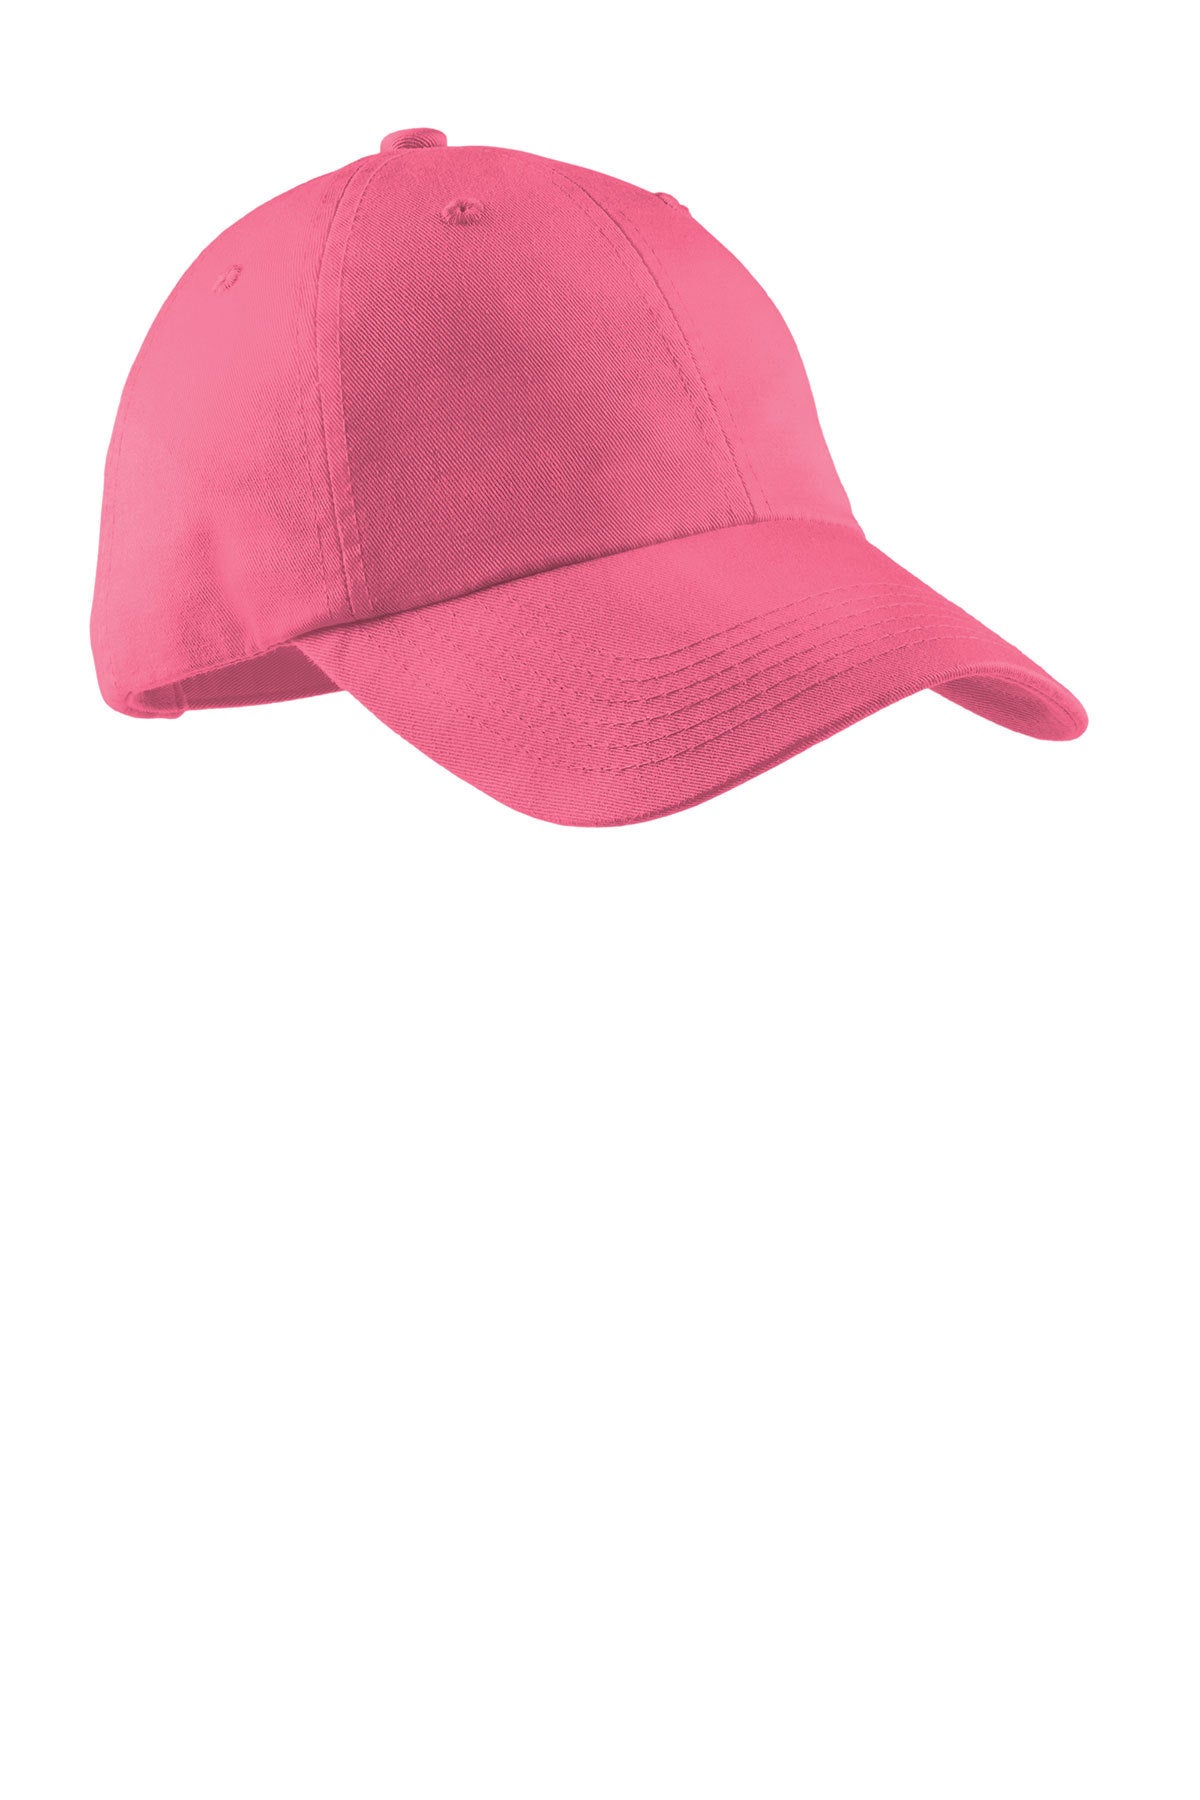 Port Authority Ladies Garment-Washed Custom Caps, Bright Pink